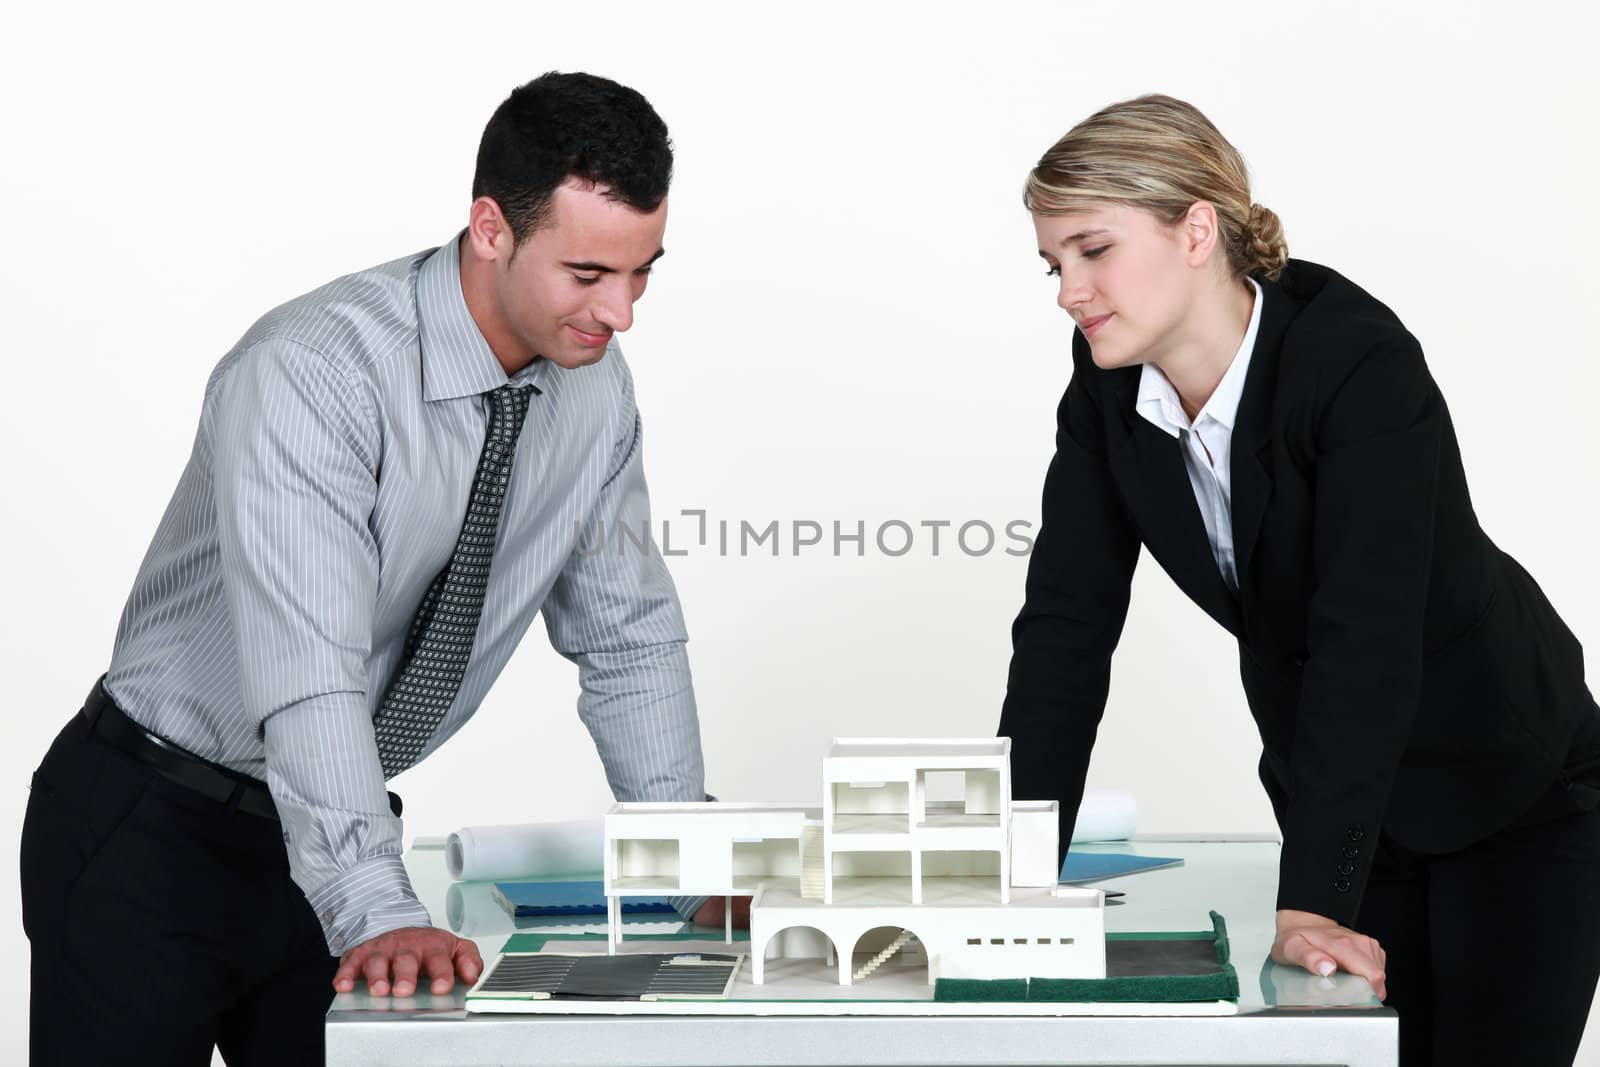 Architects looking at a 3D model